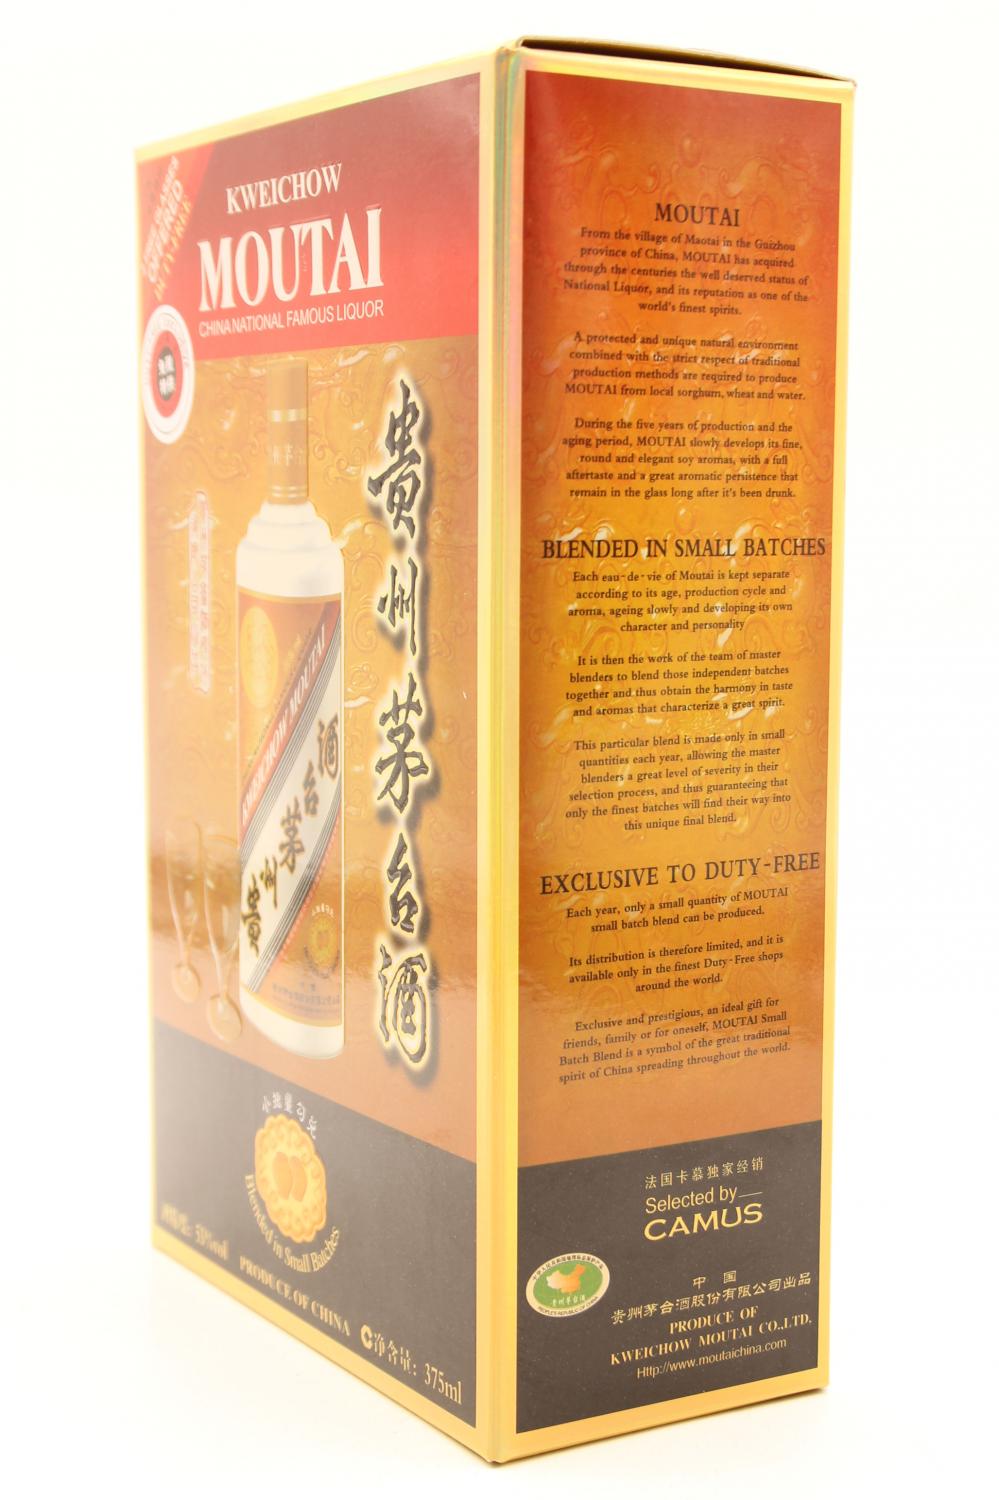 1) 2018 Moutai Blended in Small Batches 375ml (Exculsive to Duty